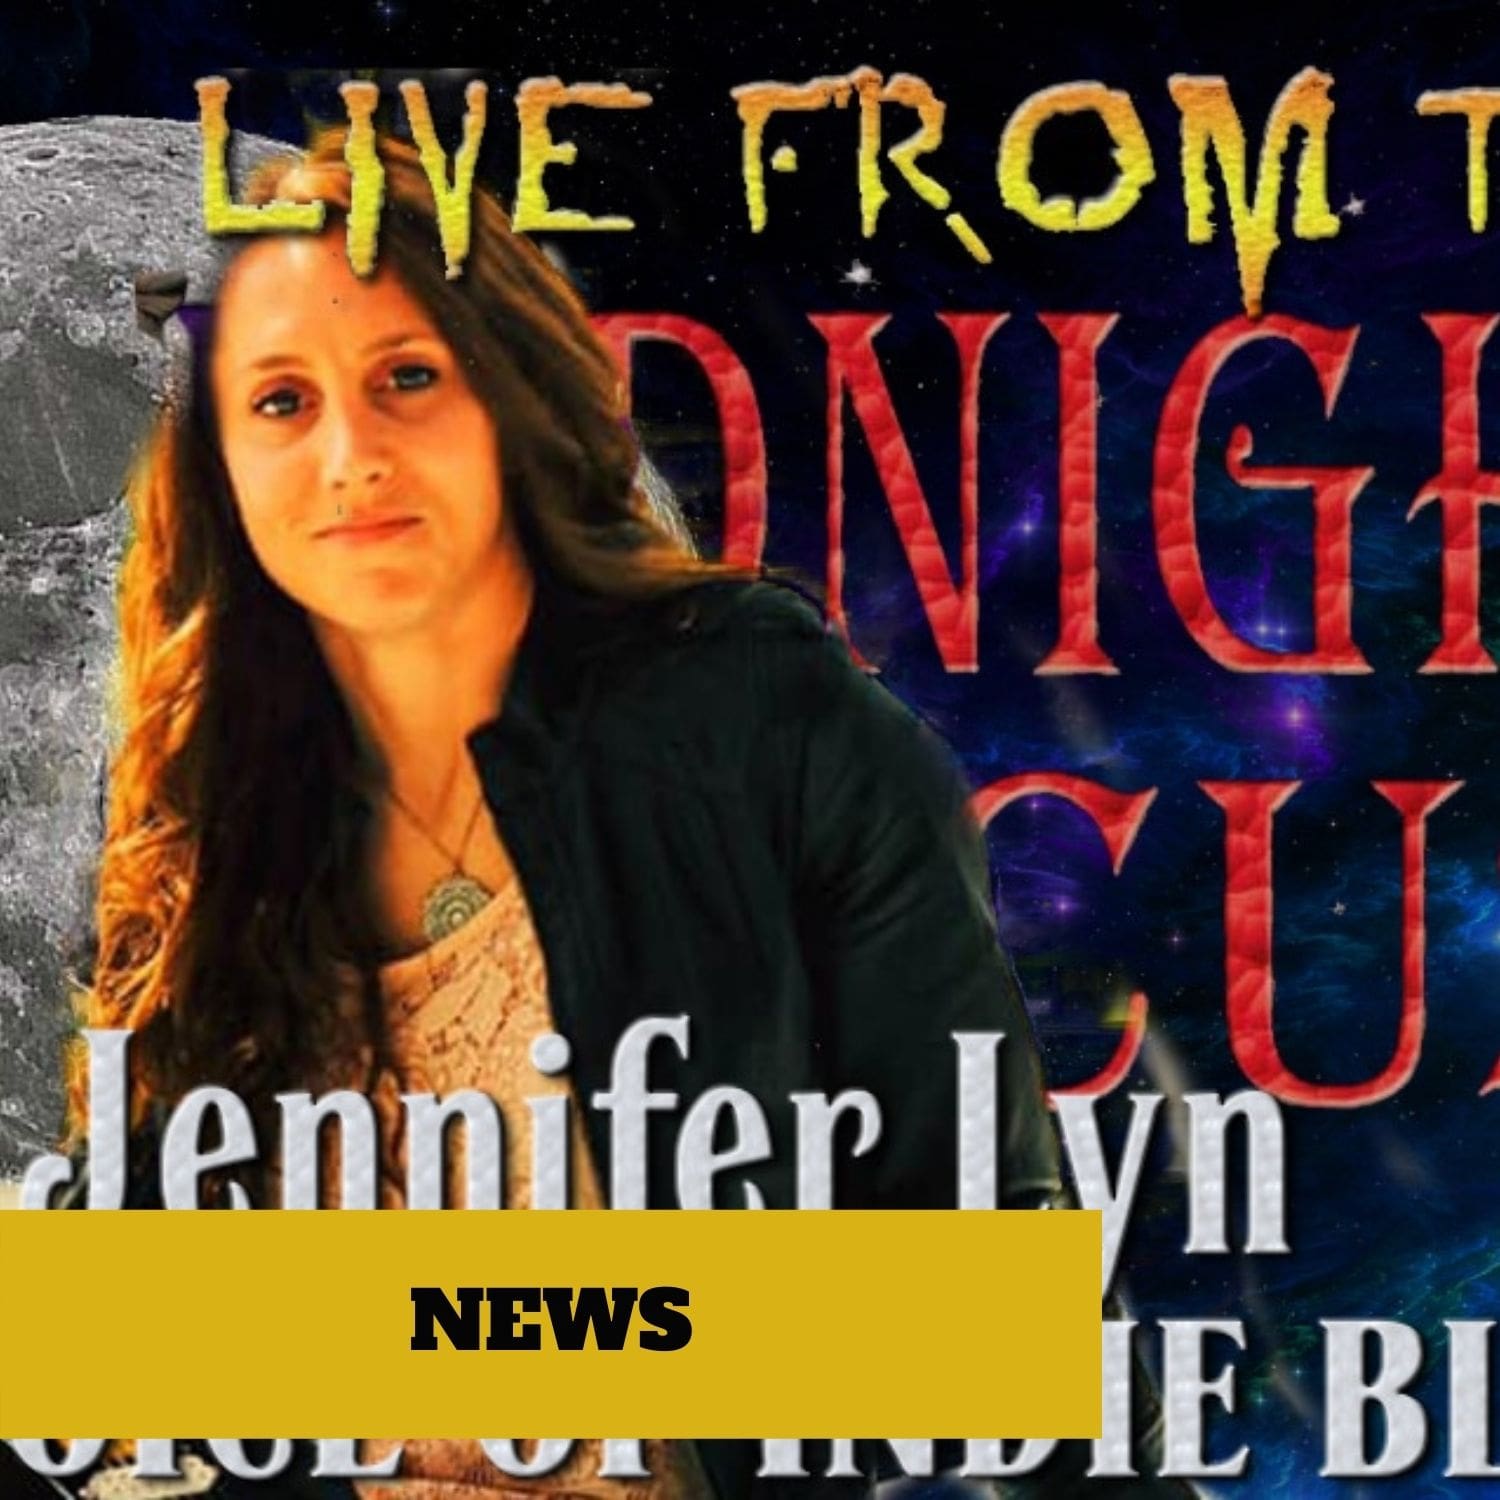 News about the band Jennifer Lyn & The Groove Revival